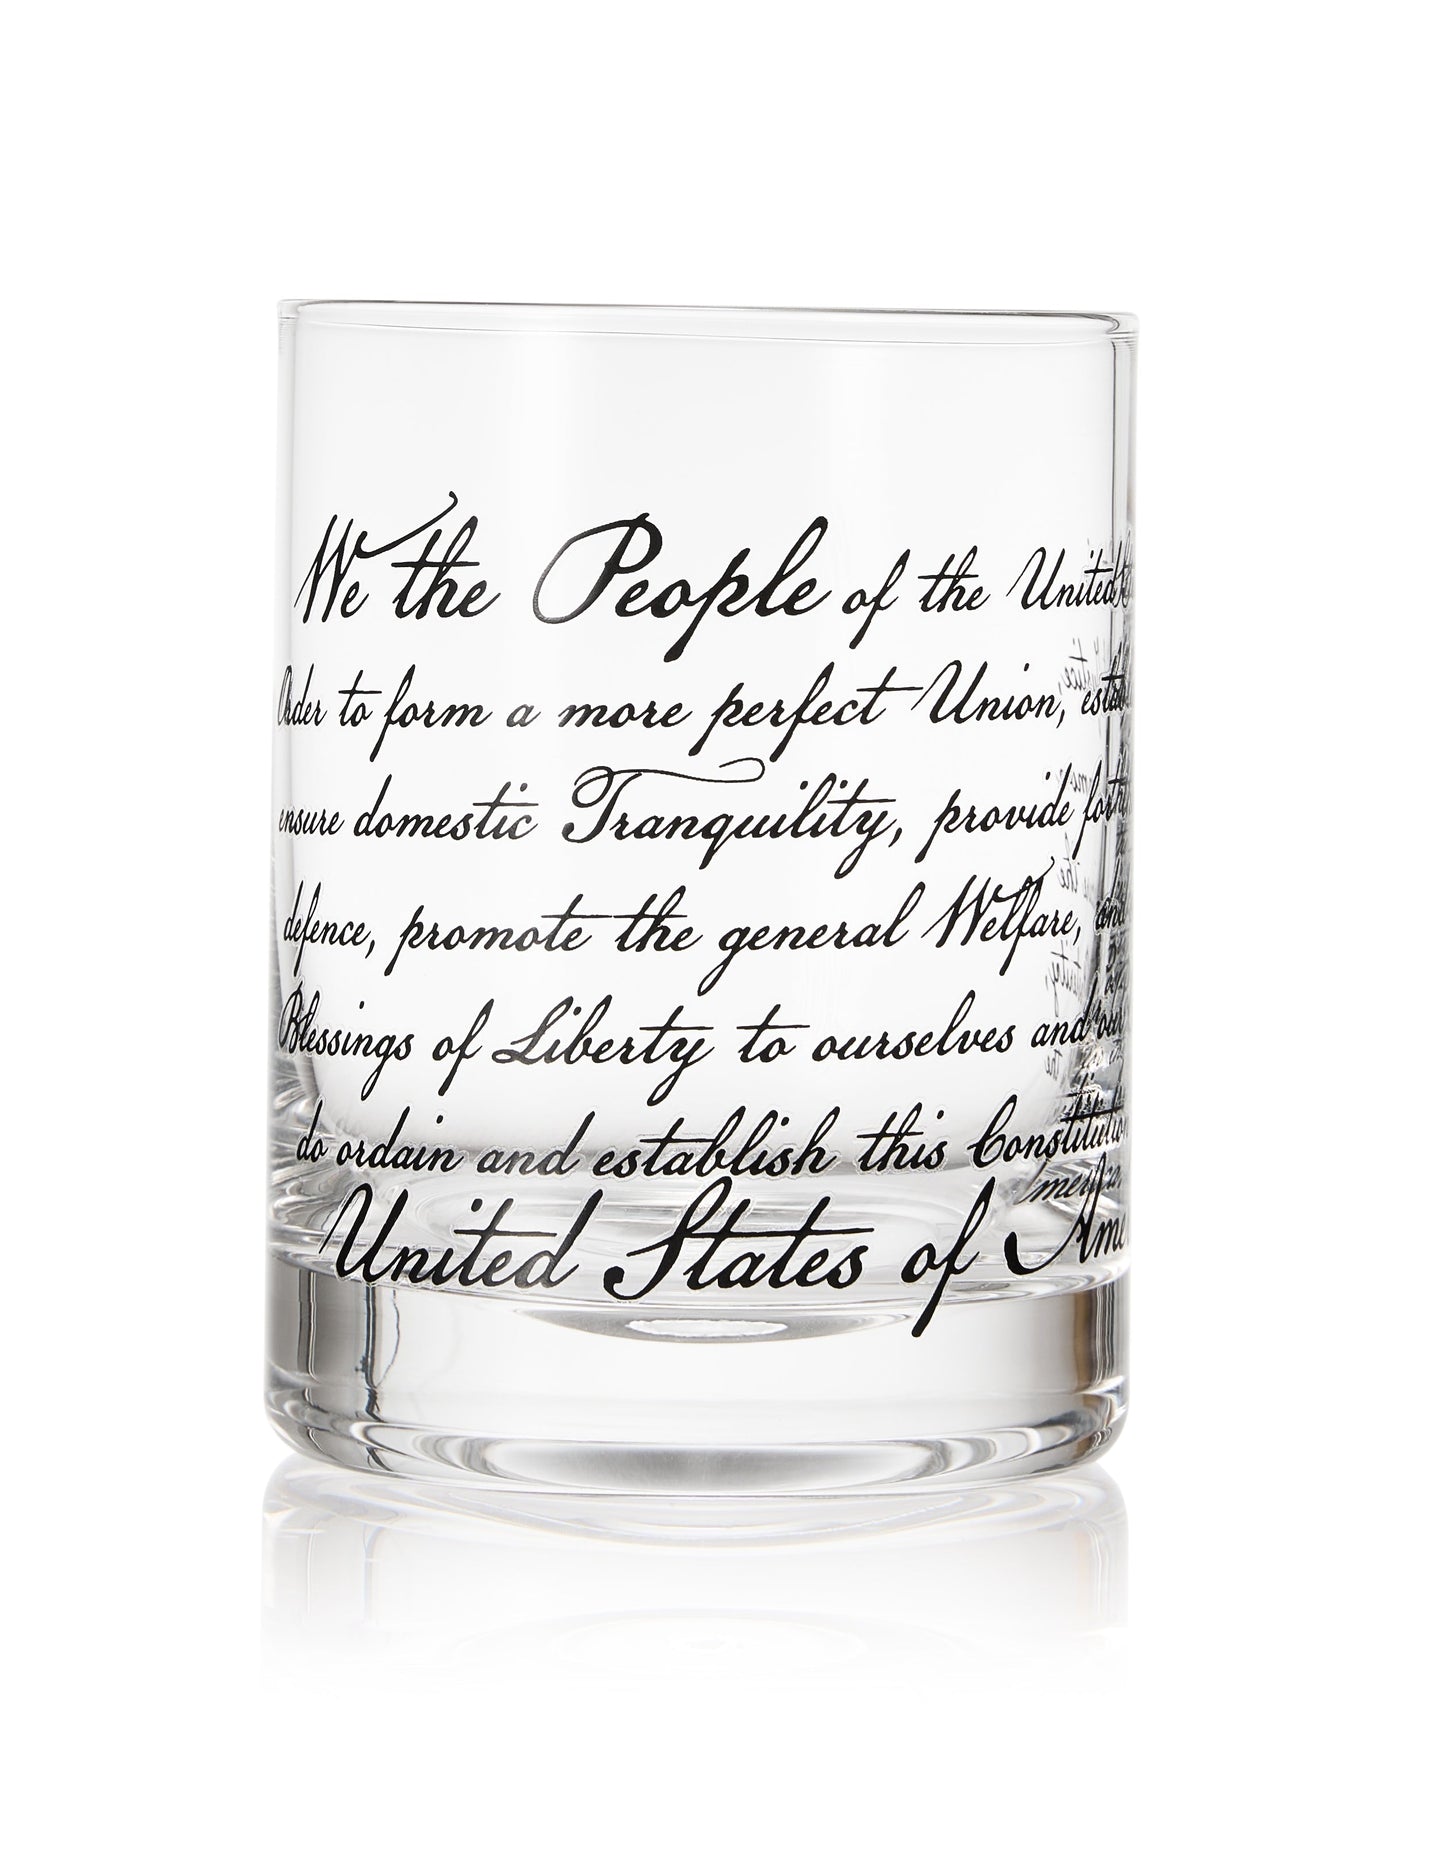 Whiskey Glasses – United States Constitution - Wood American Flag Tray & Set of 4 We The People 10oz America Glassware, Old Fashioned Rocks Glass, Freedom Of Speech Law Gift Set US Patriotic-5